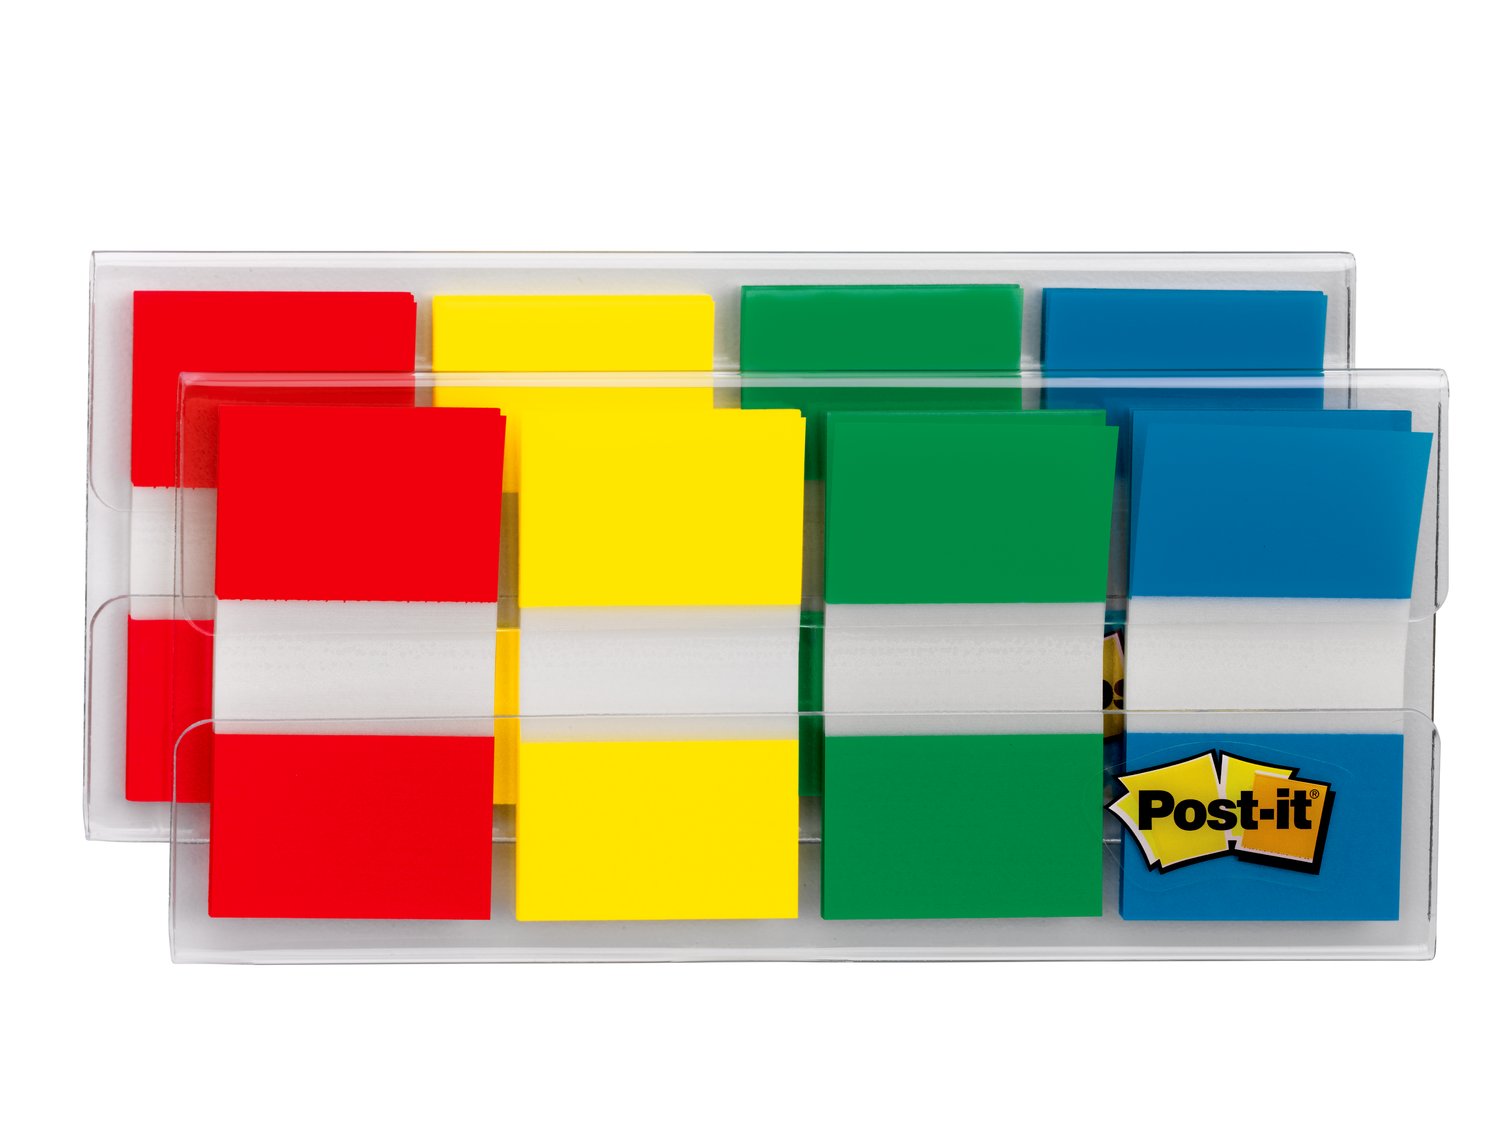 7000127122 - Post-it Flags 680-RYGB2, .94 in. x 1.7 in. (23.8 mm x 43.2 mm) Red,
Yellow, Blue, Green 24 pk/cs